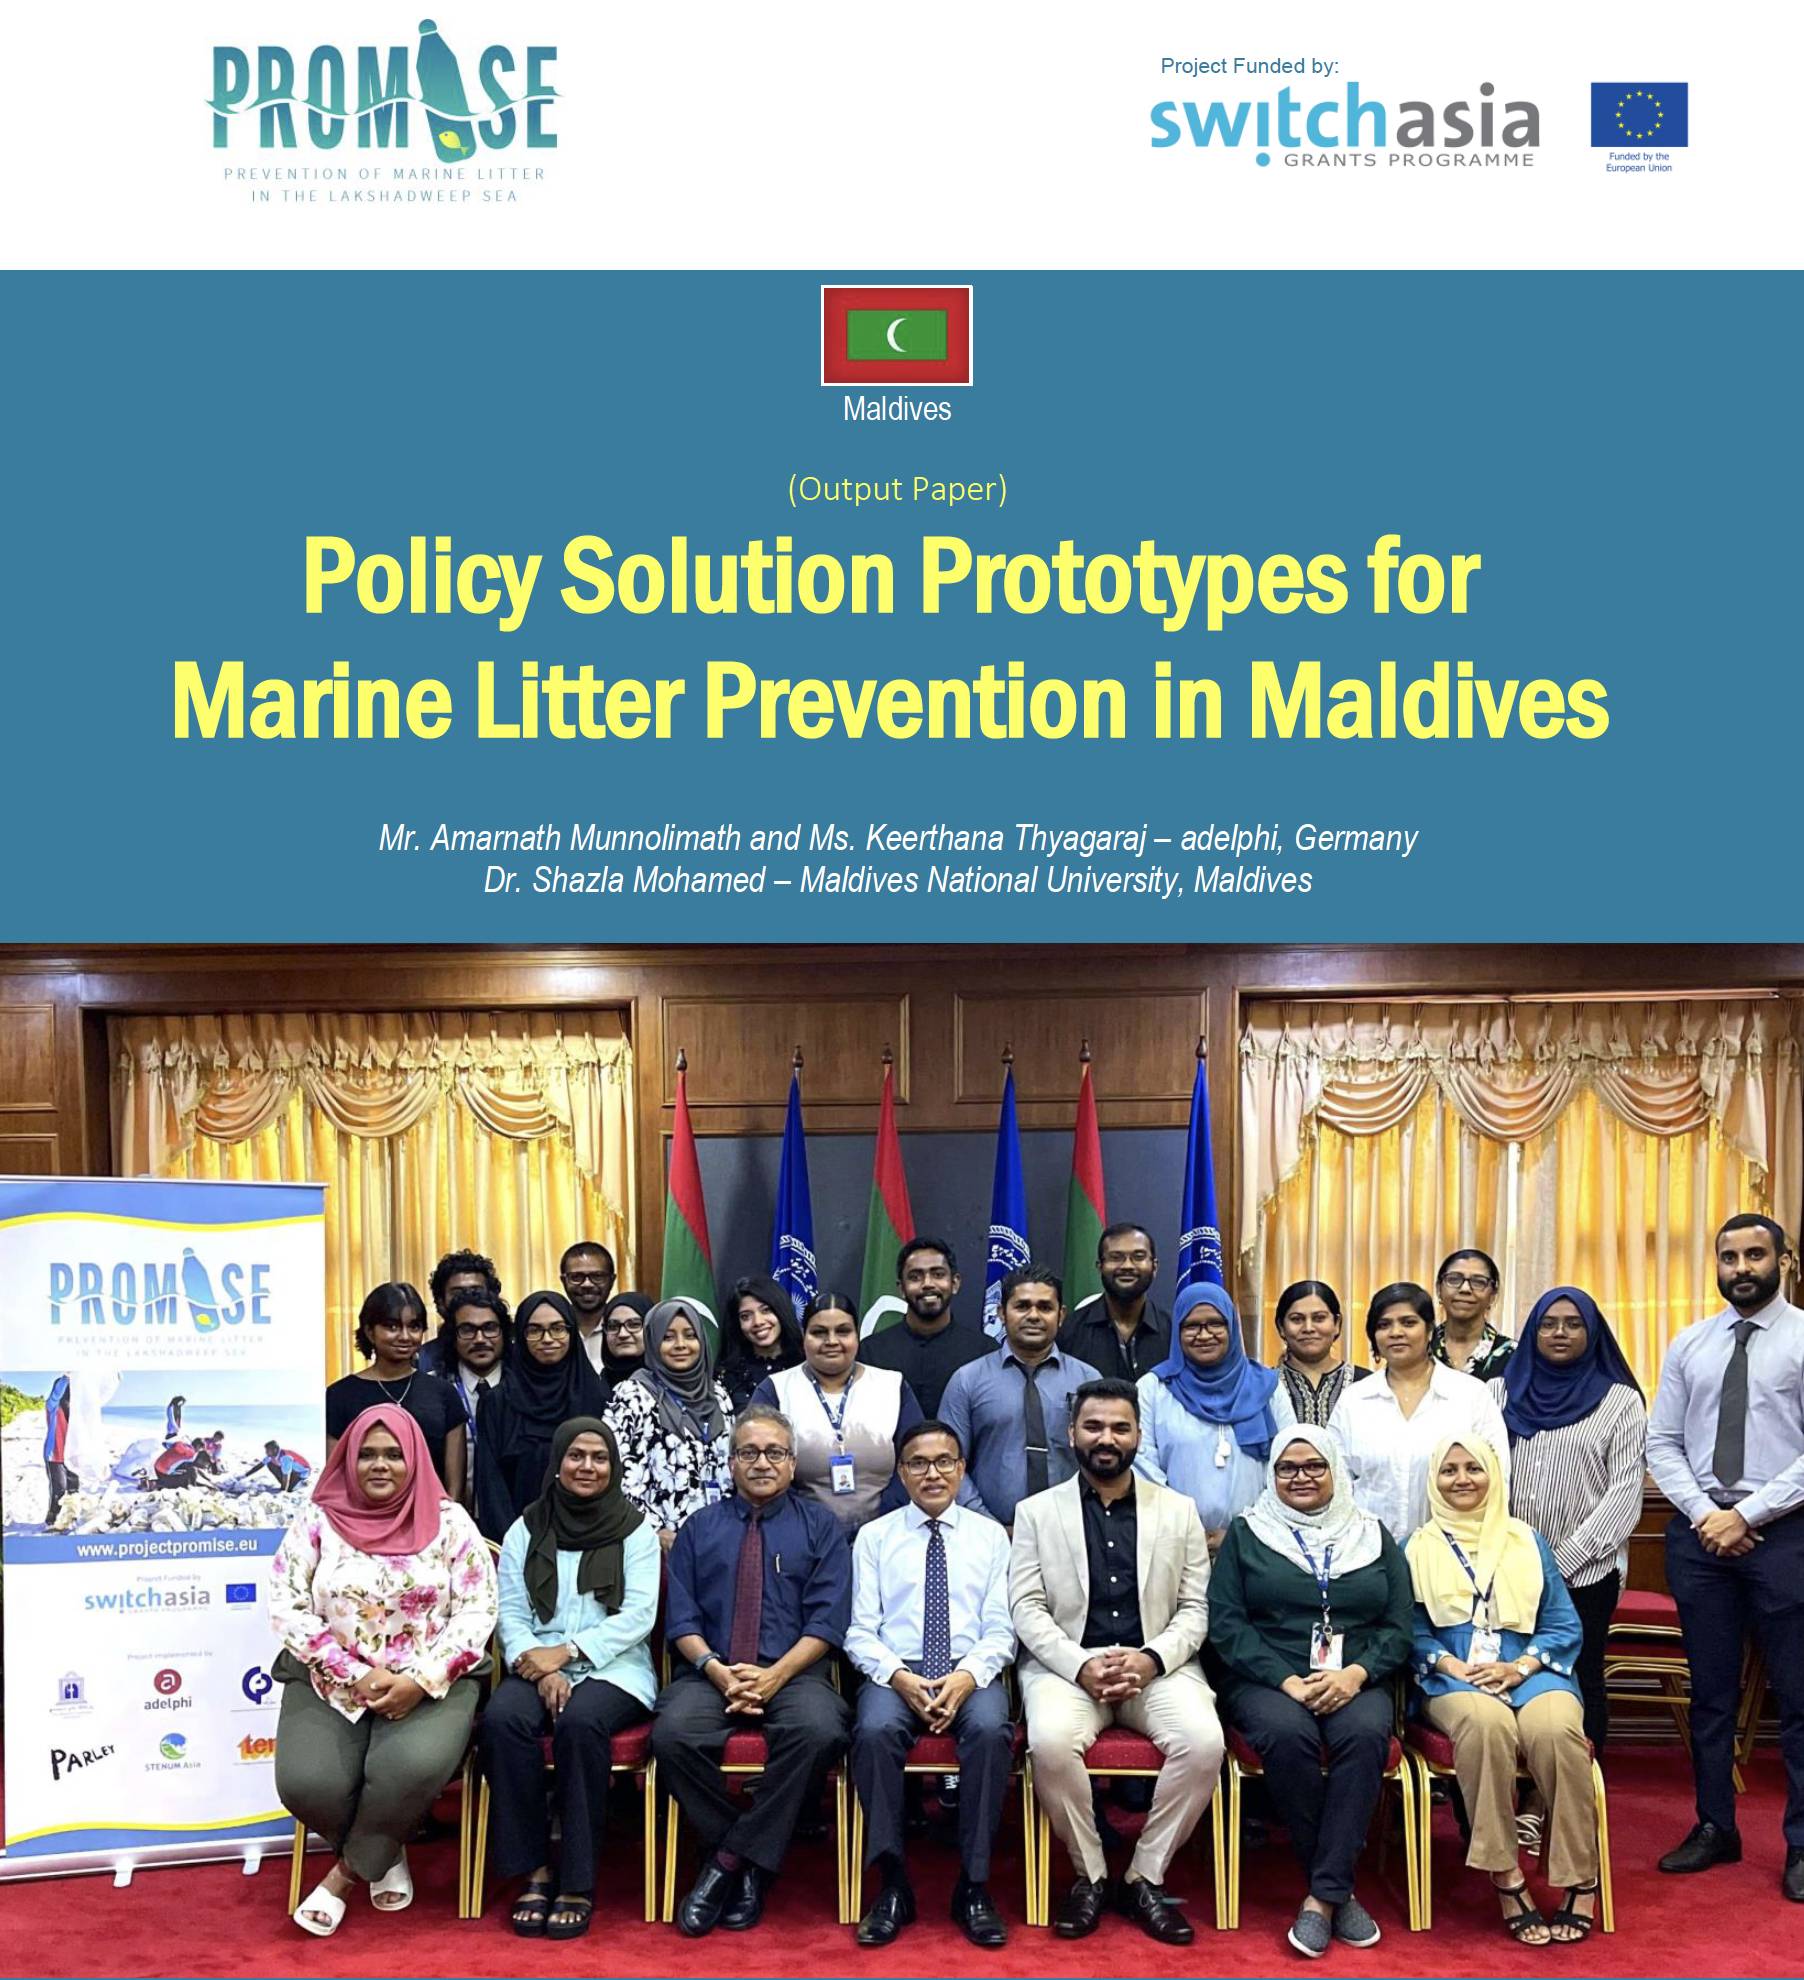 Policy Solution Prototypes for Marine Litter Prevention in Maldives